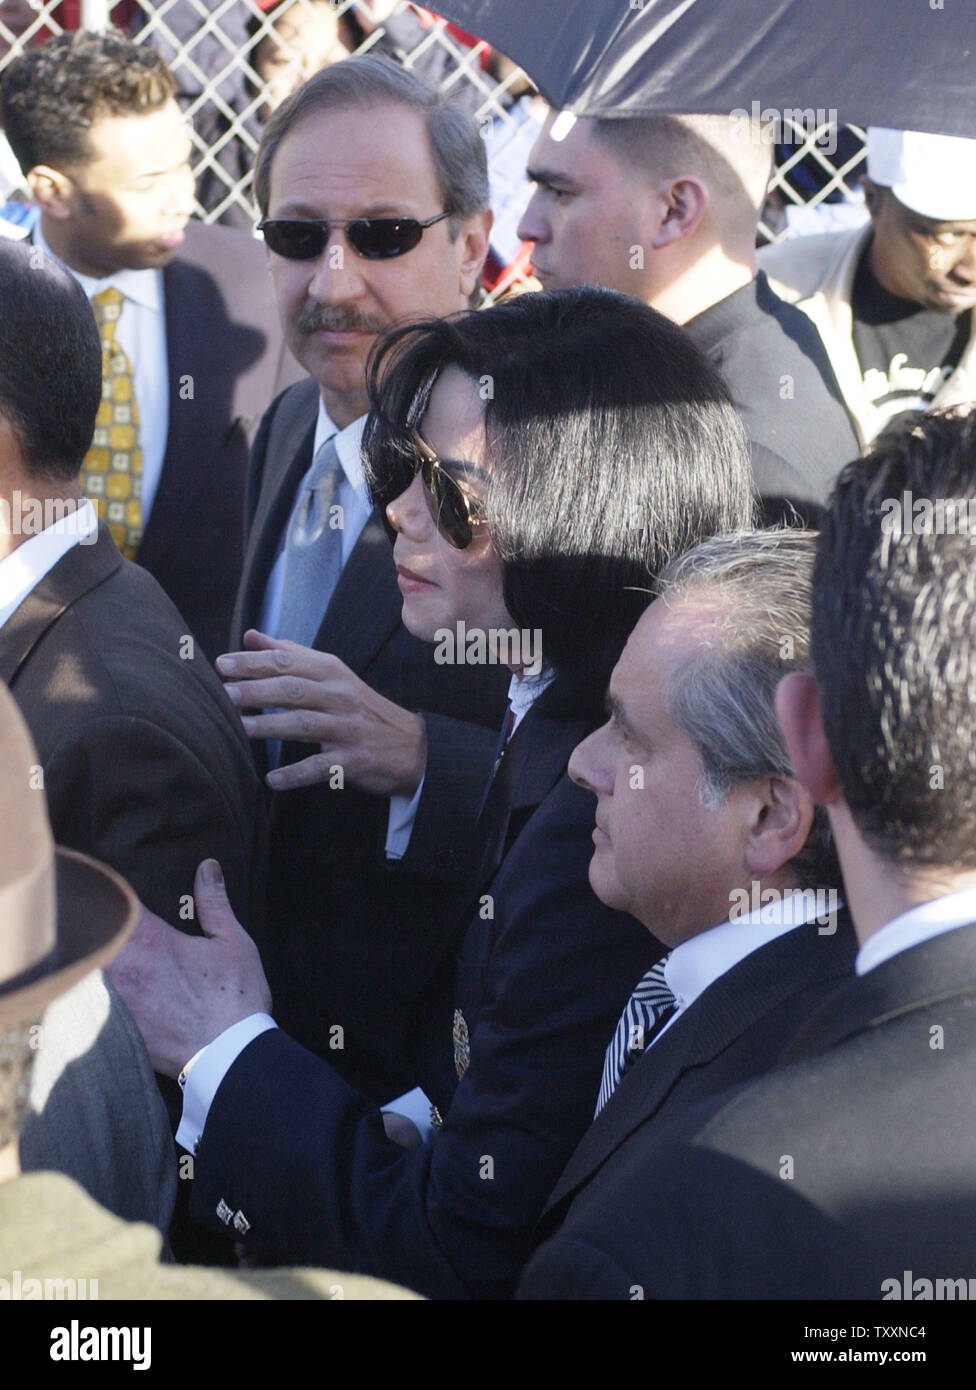 Pop singer Michael Jackson arrives at the courthouse in Santa Maria, California January 16, 2004. Jackson pleaded innocent to child molestation charges on Friday during a hearing in which a California judge gave the onetime 'King of Pop' a stern lecture for showing up late and slapped a gag order on his high-profile legal team.  (UPI Photo/Jim Ruymen) Stock Photo